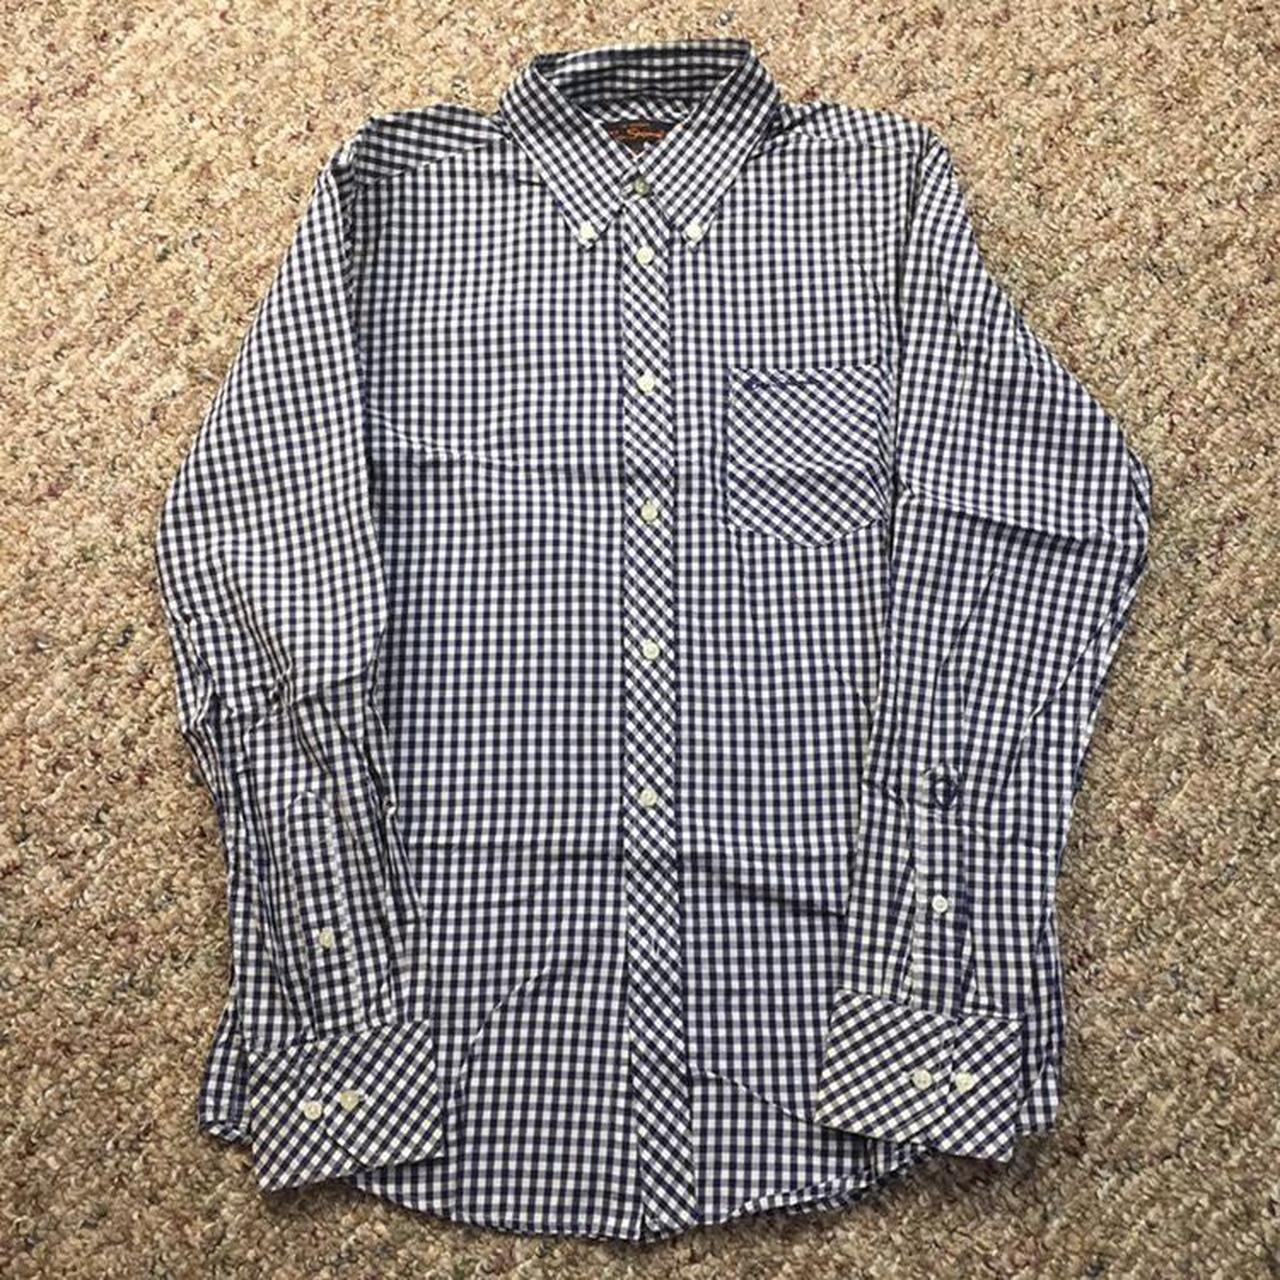 Ben Sherman Navy and White Plaid Button Up Long... - Depop